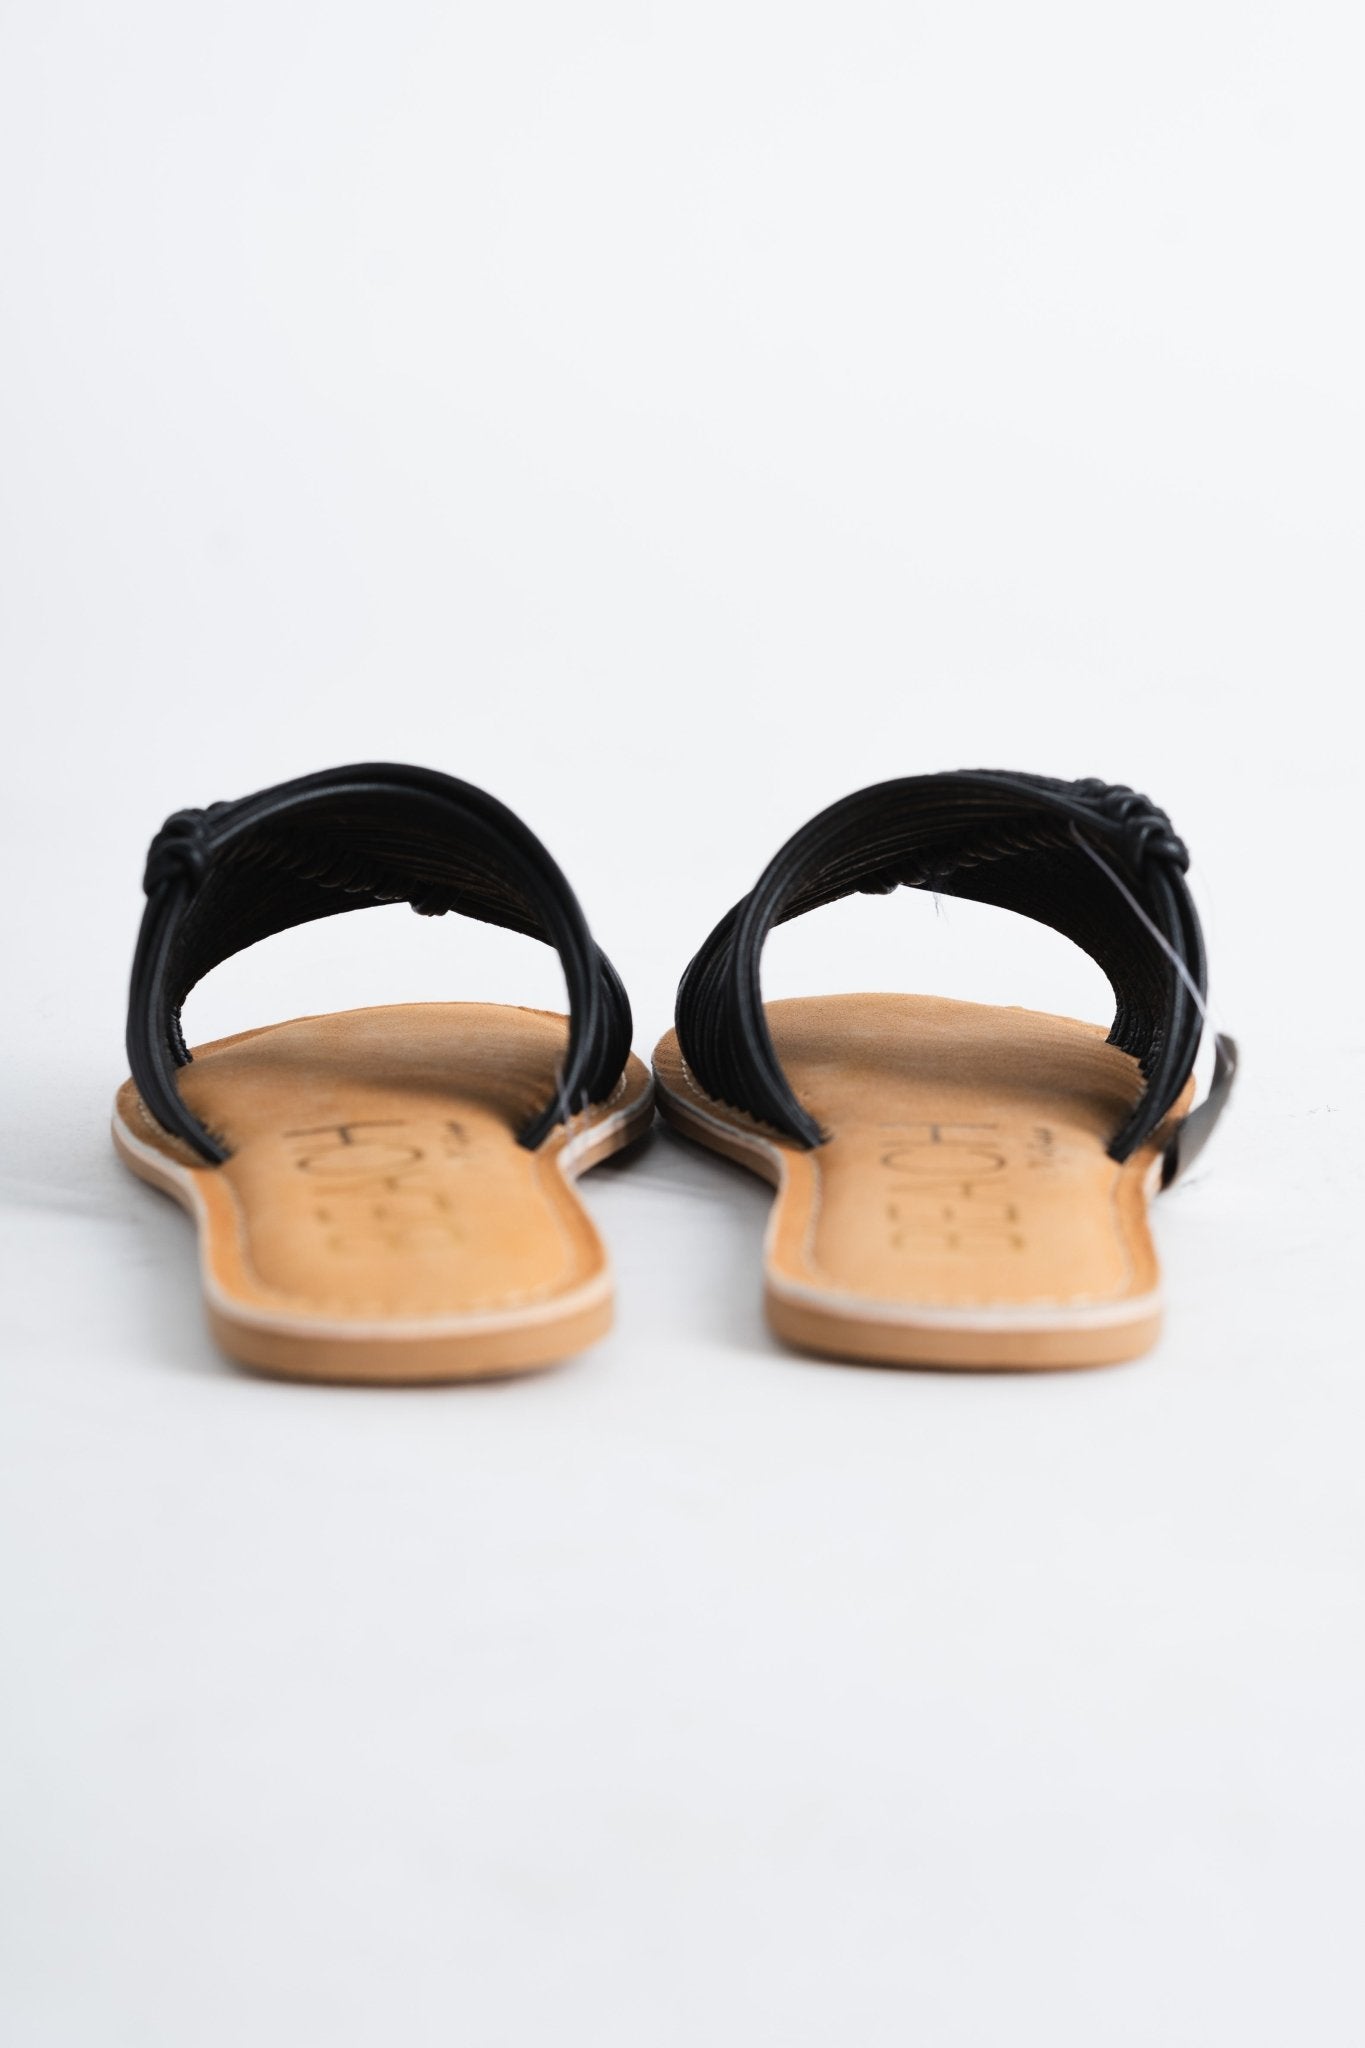 Baxter leather sandals black Stylish shoes - Womens Fashion Shoes at Lush Fashion Lounge Boutique in Oklahoma City